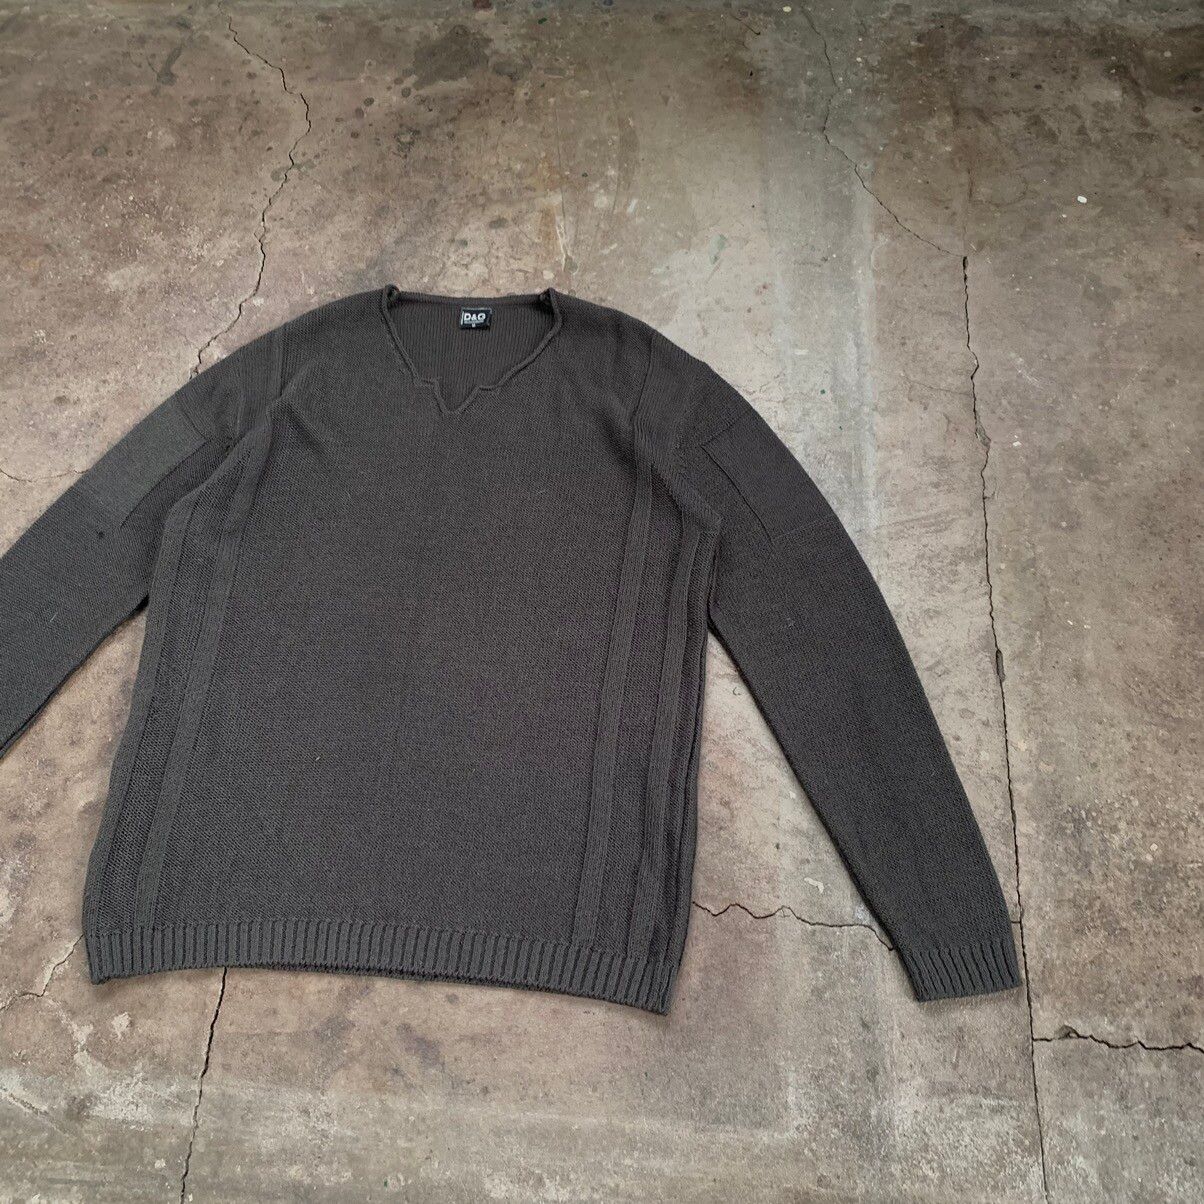 Vintage Dolce and gabbana vintage mesh sweater Size US M / EU 48-50 / 2 - 2 Preview